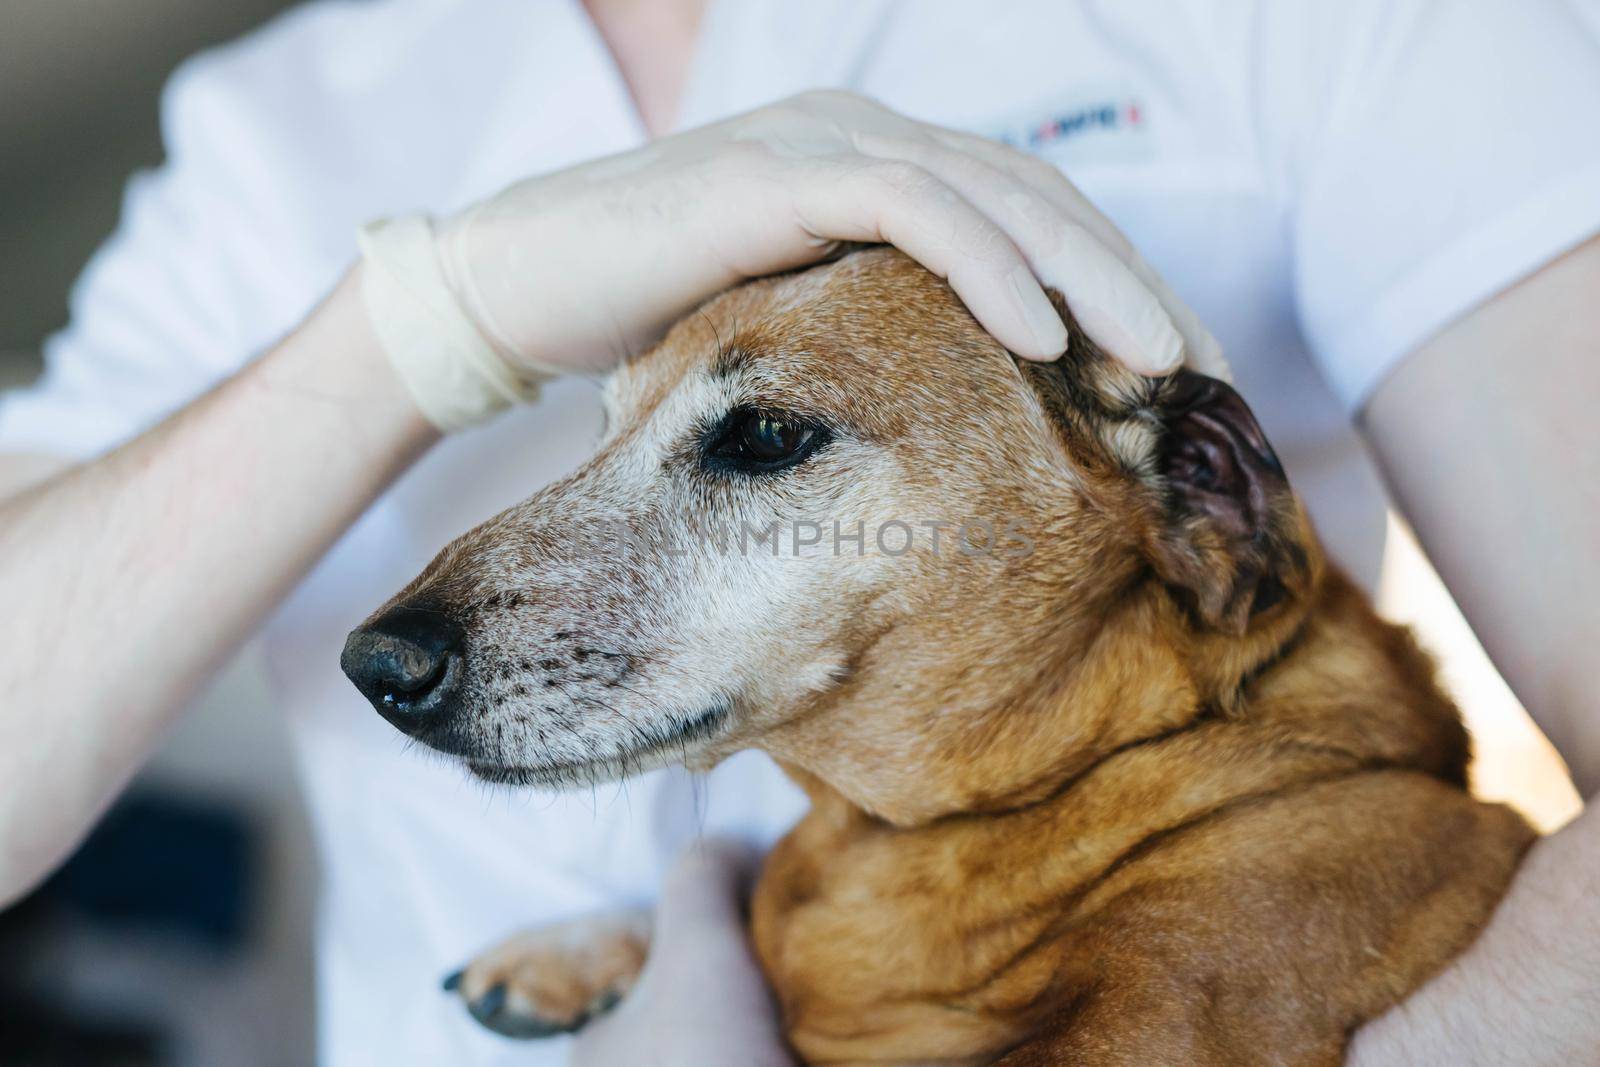 An adult red Dachshund is being examined by a veterinarian. A veterinarian checks the teeth of an old red dog.